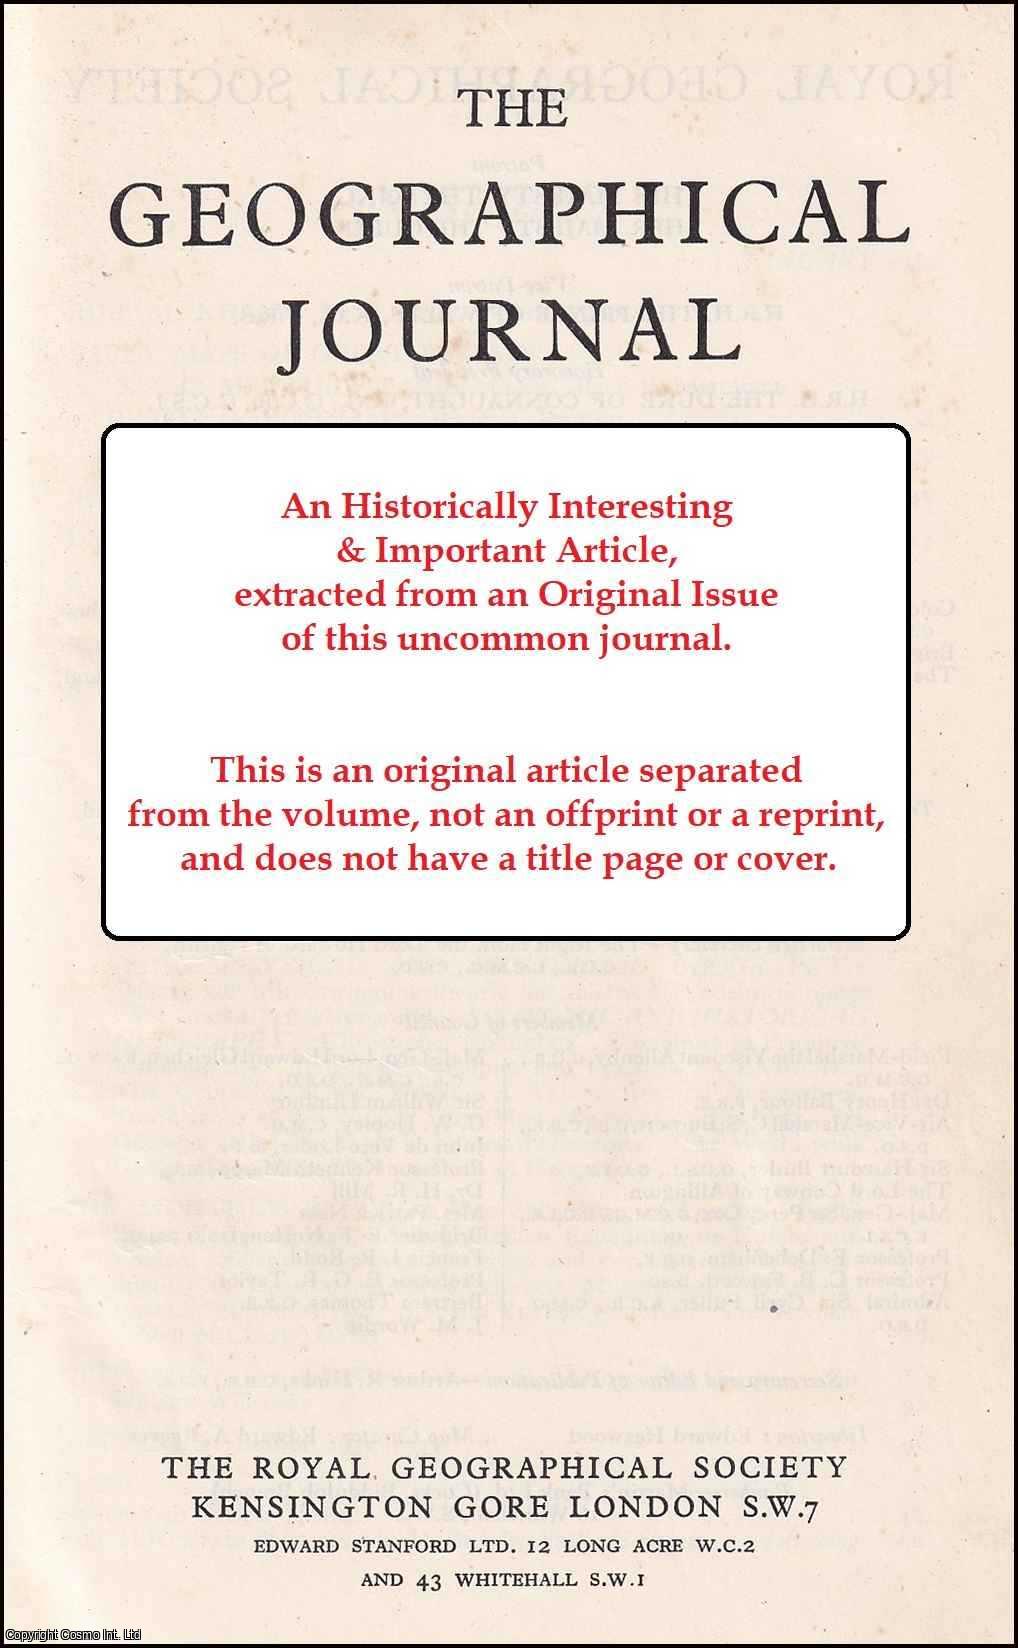 Walter Dostal - The Shihuh of Northern Oman: A Contribution to Cultural Ecology. An original article from the Geographical Journal, 1972.